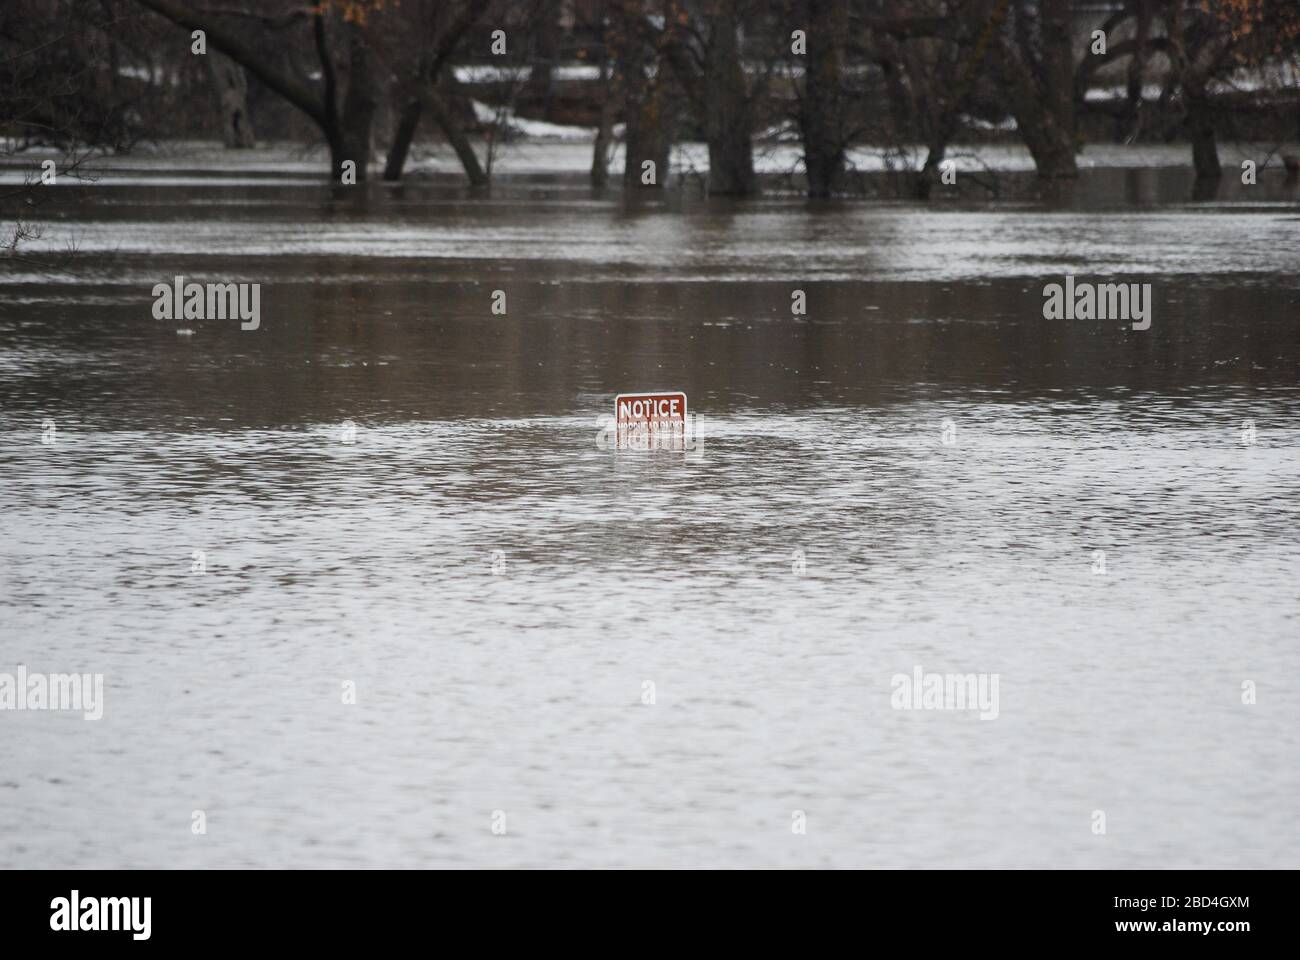 Traffic sign submerged in floodwater from Red River of the North at Moorhead, MN. Photo taken at 2nd Ave and 3rd St, Moorhead, MN Stock Photo